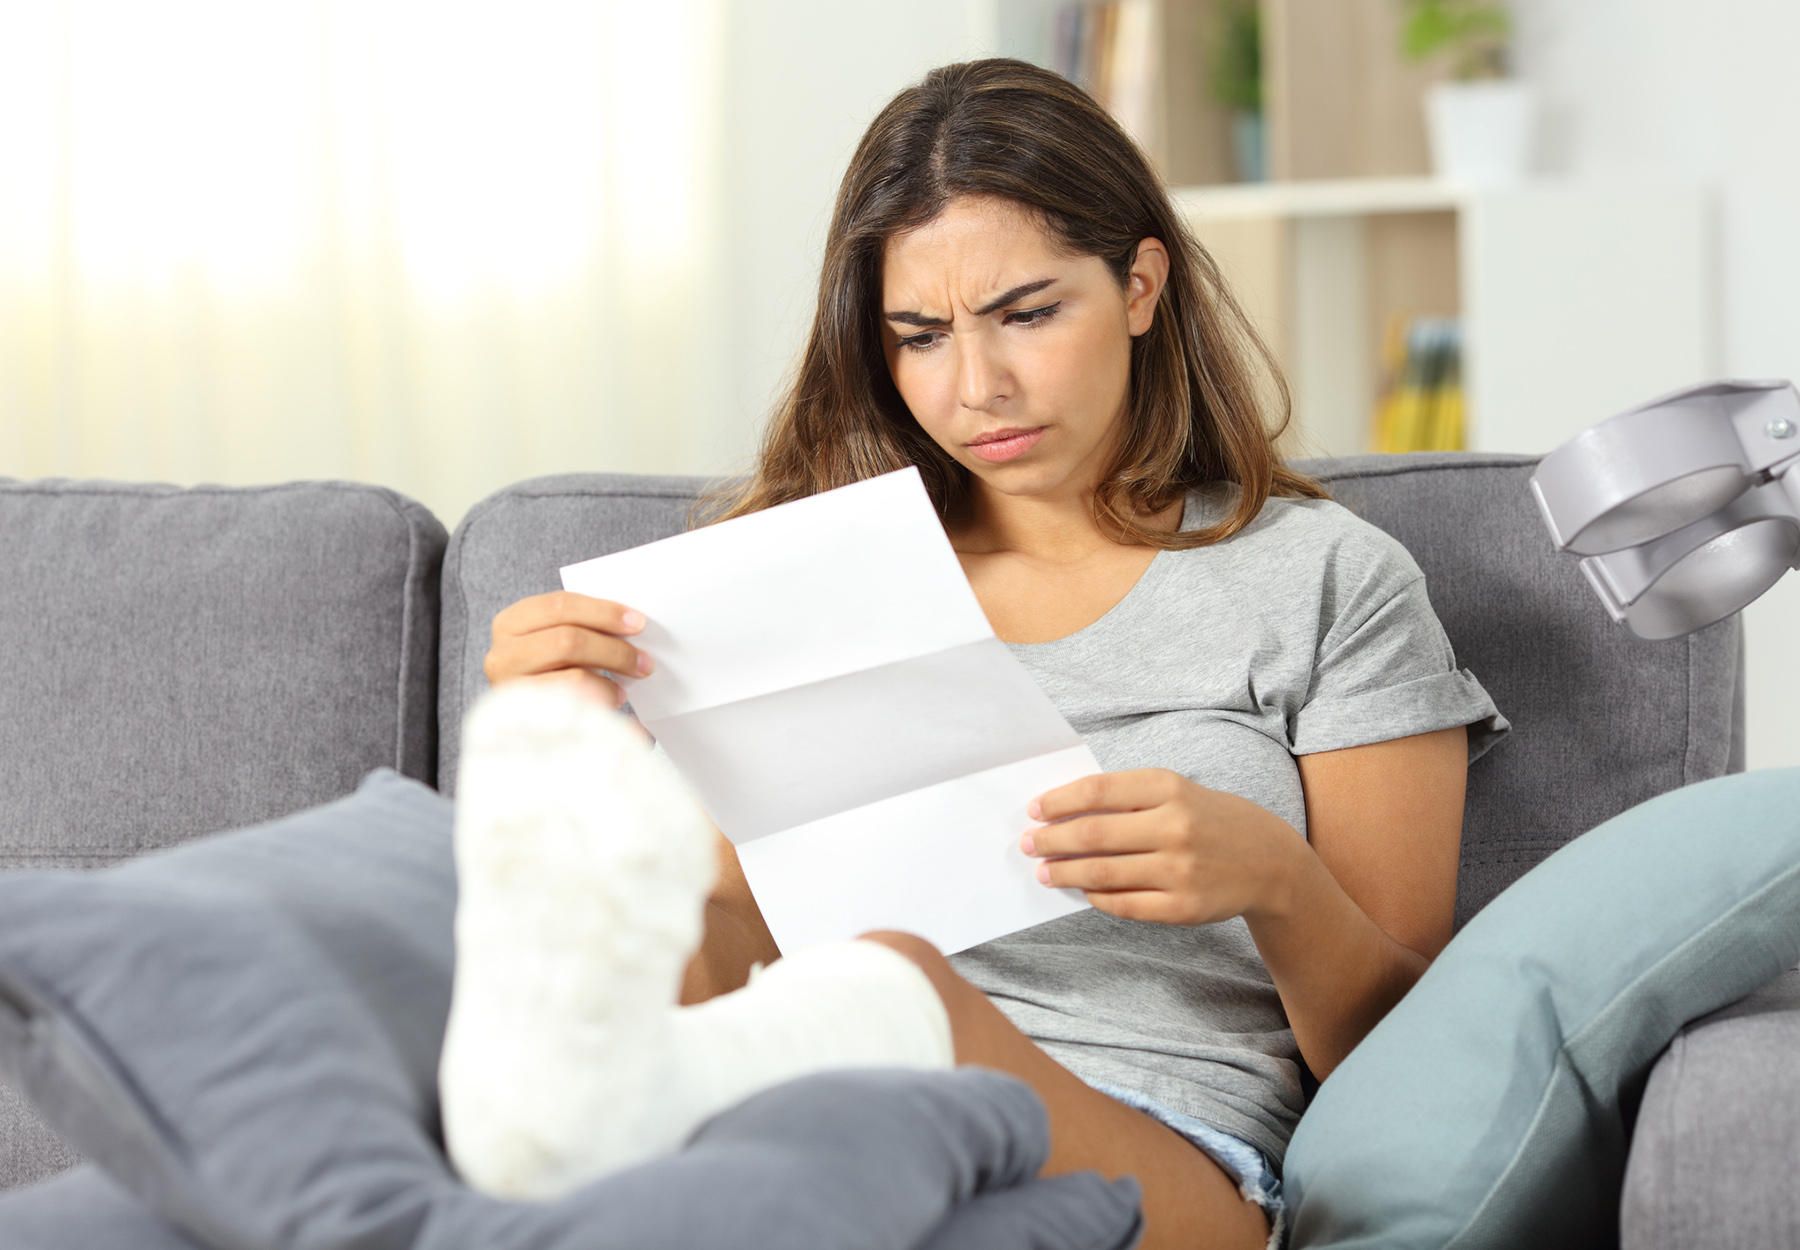 Woman with a cast on her leg is sitting on a couch looking at a medical bill and frowning. Stock photo.